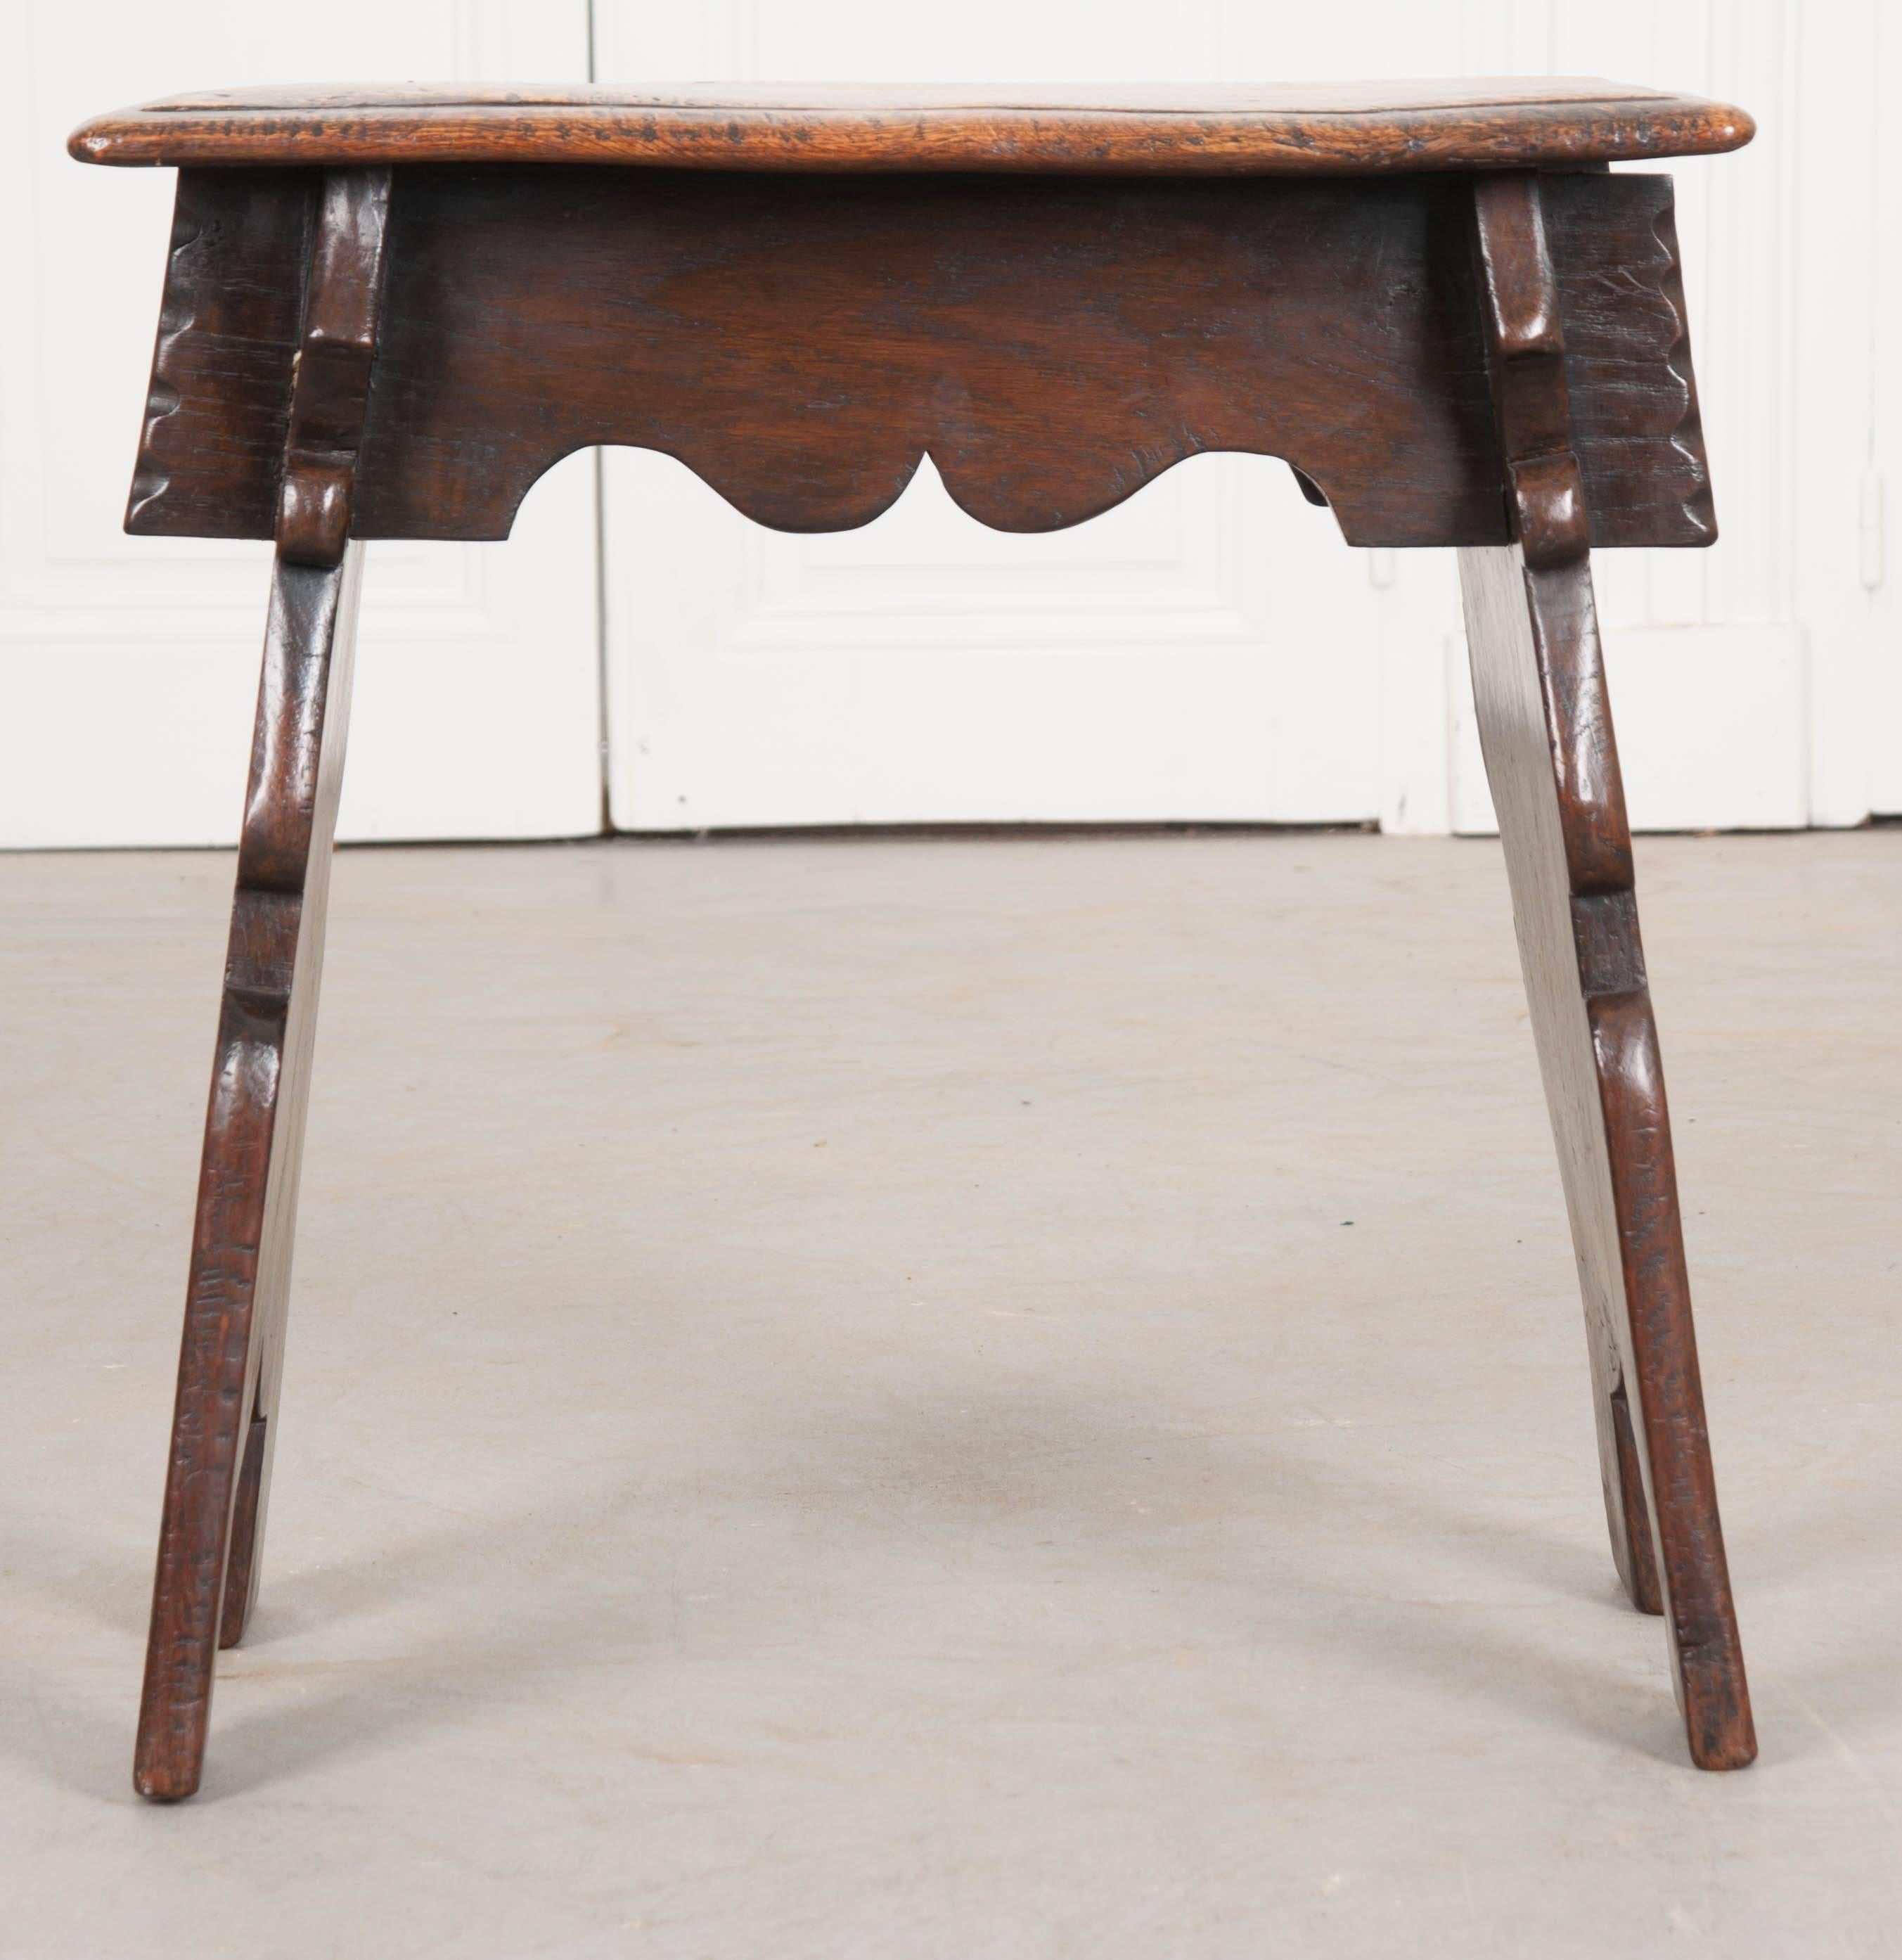 A spectacular oak joint stool from 1900s England. This stool features excellent patina from years of use as well as unique, shaped buttresses that support anyone seated. These low stools can be used for many purposes and make wonderful decorative